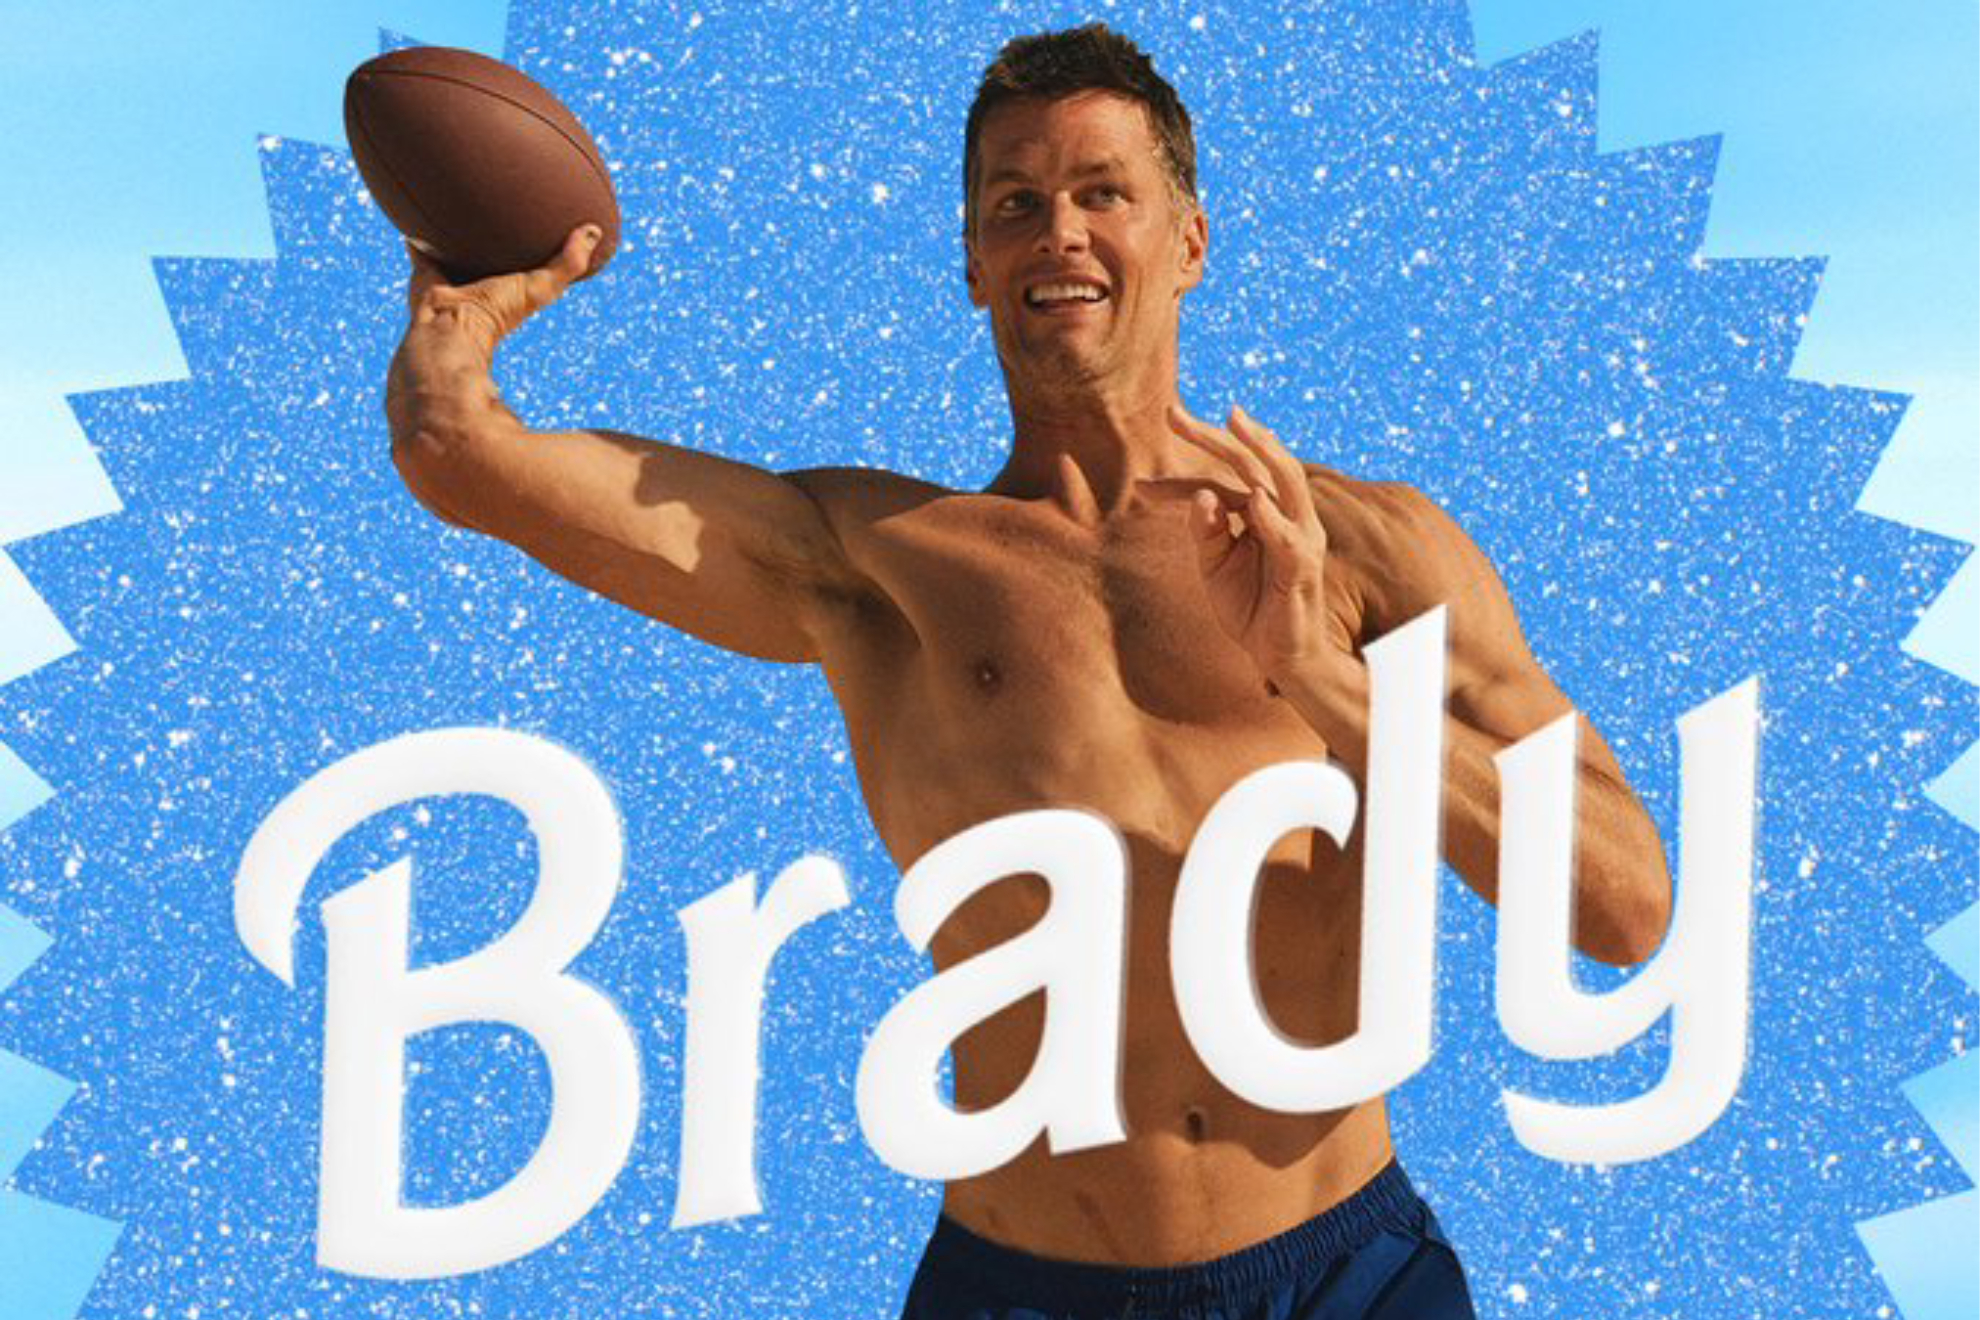 Tom Brady got the Barbie meme treatment from his own brands community manager.